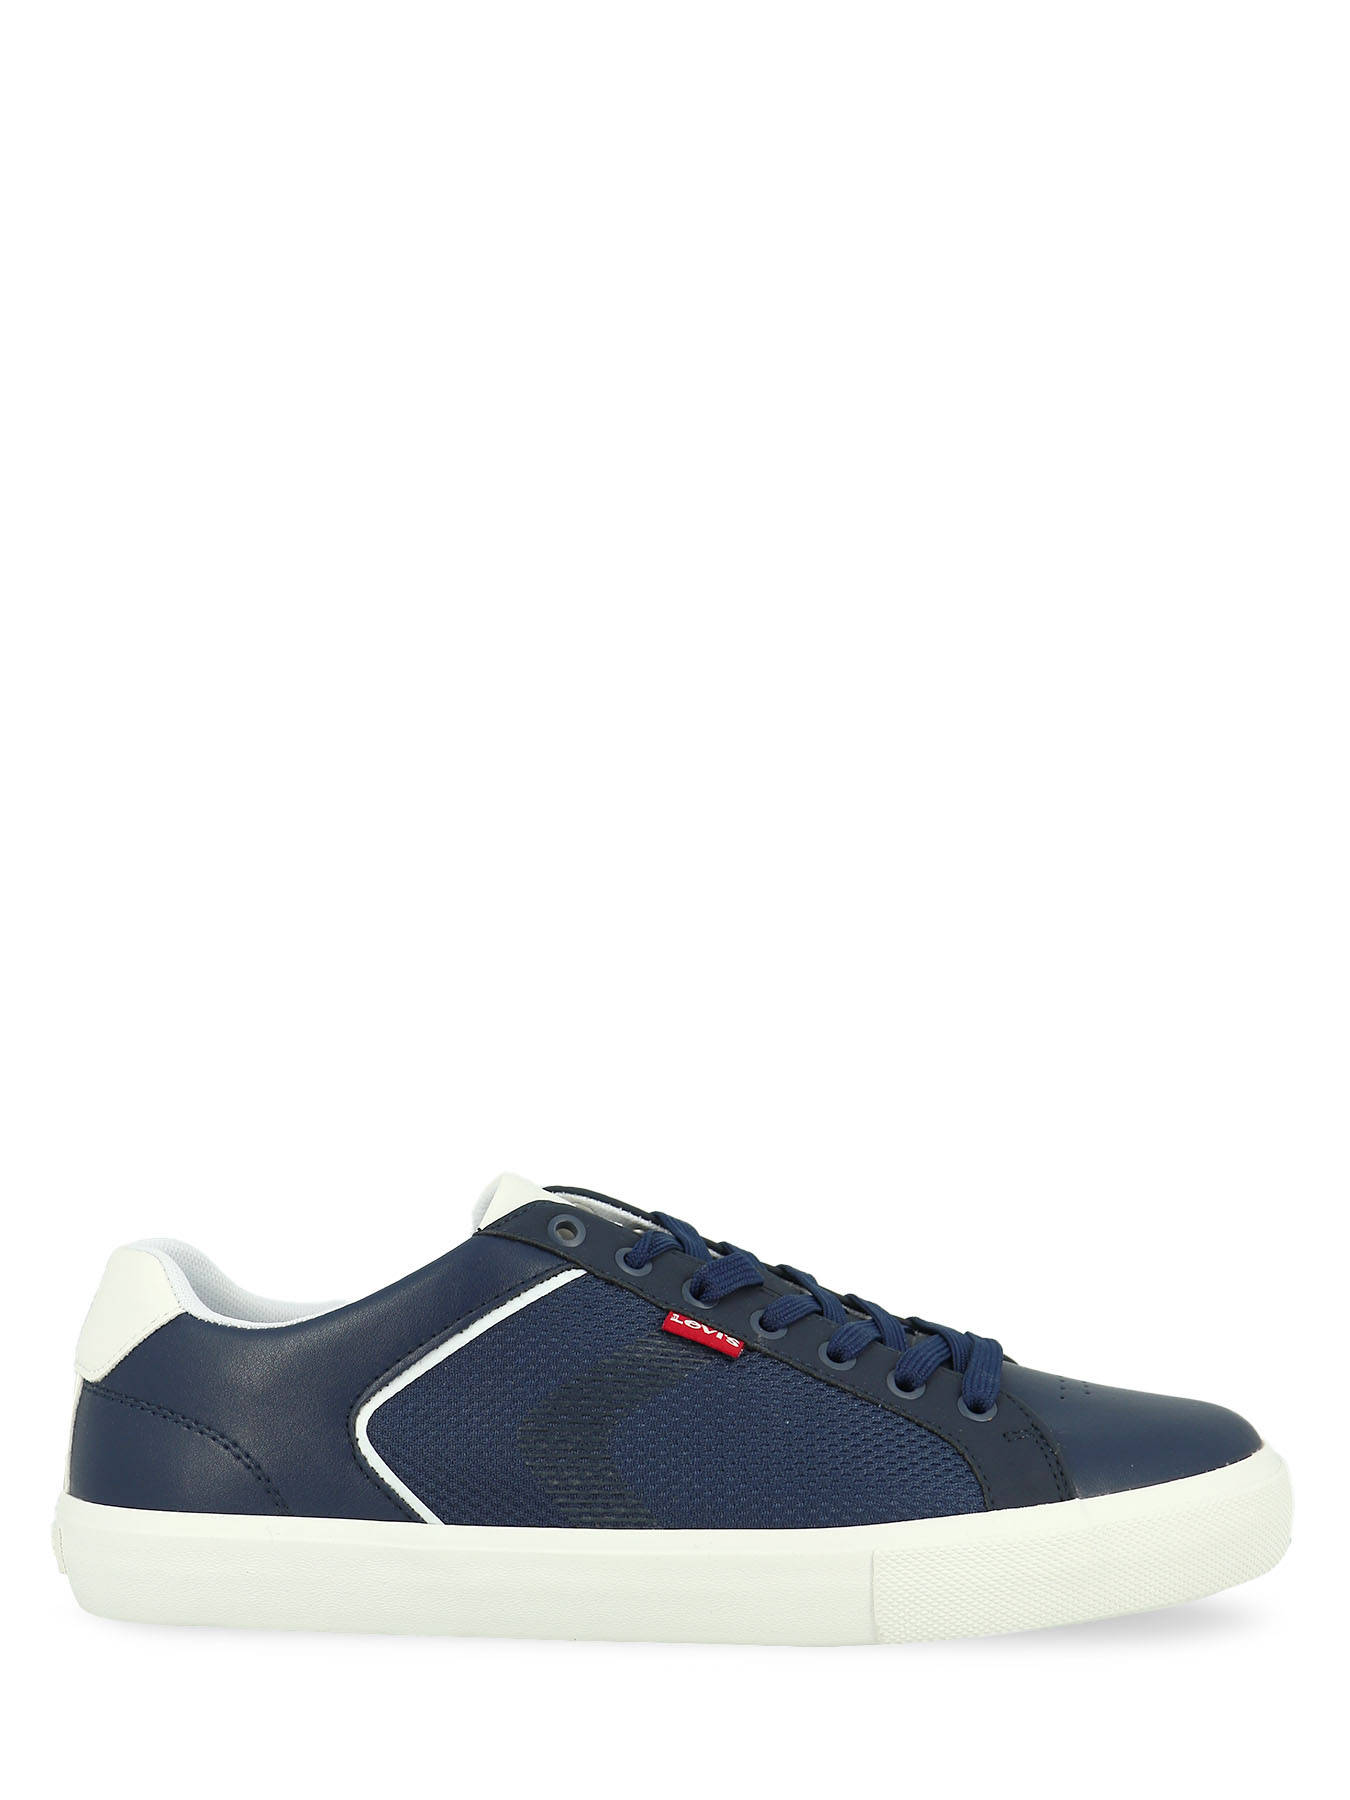 Levi's Sneakers WOODWARD - best prices